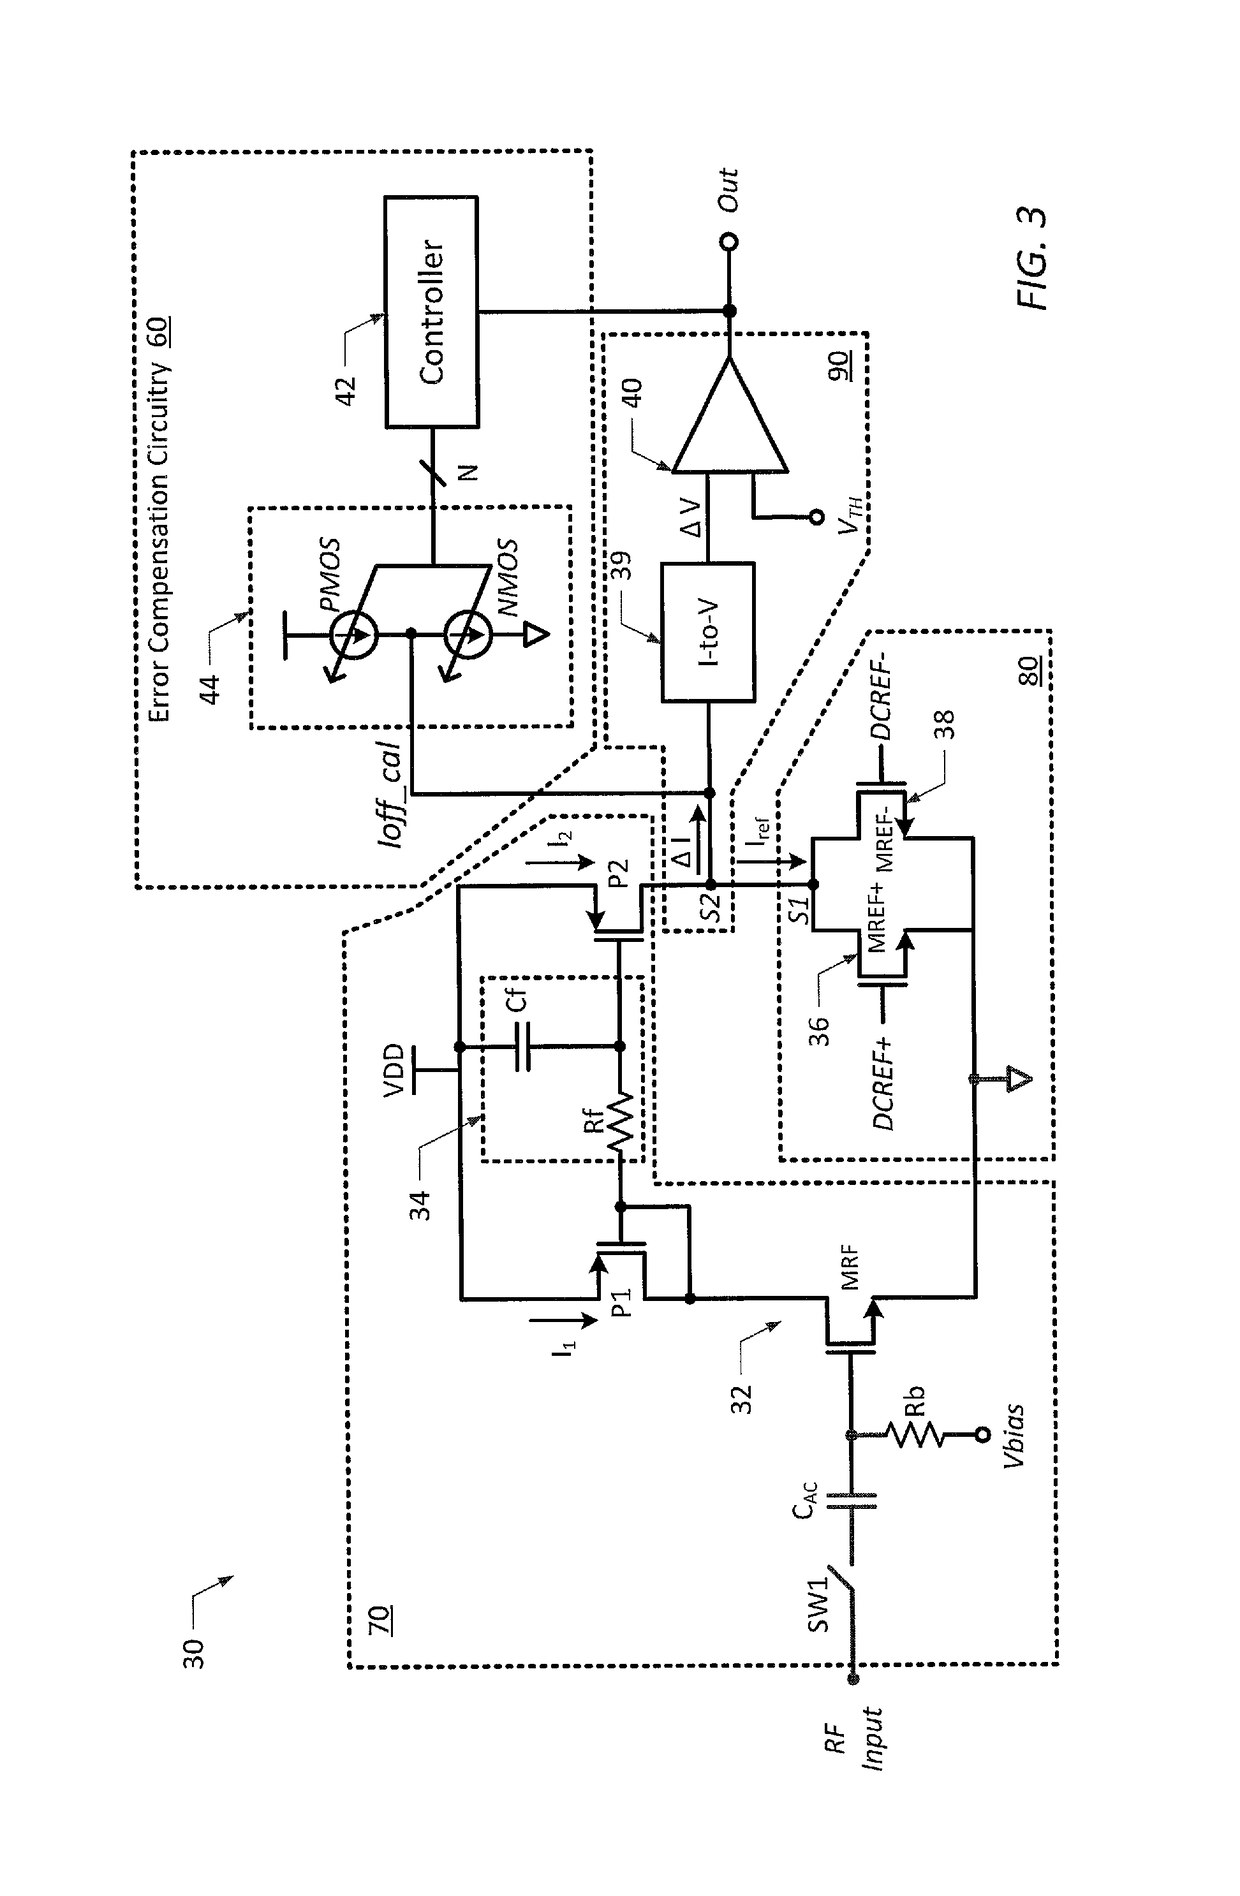 Accurate, low-power power detector circuits and related methods using programmable reference circuitry